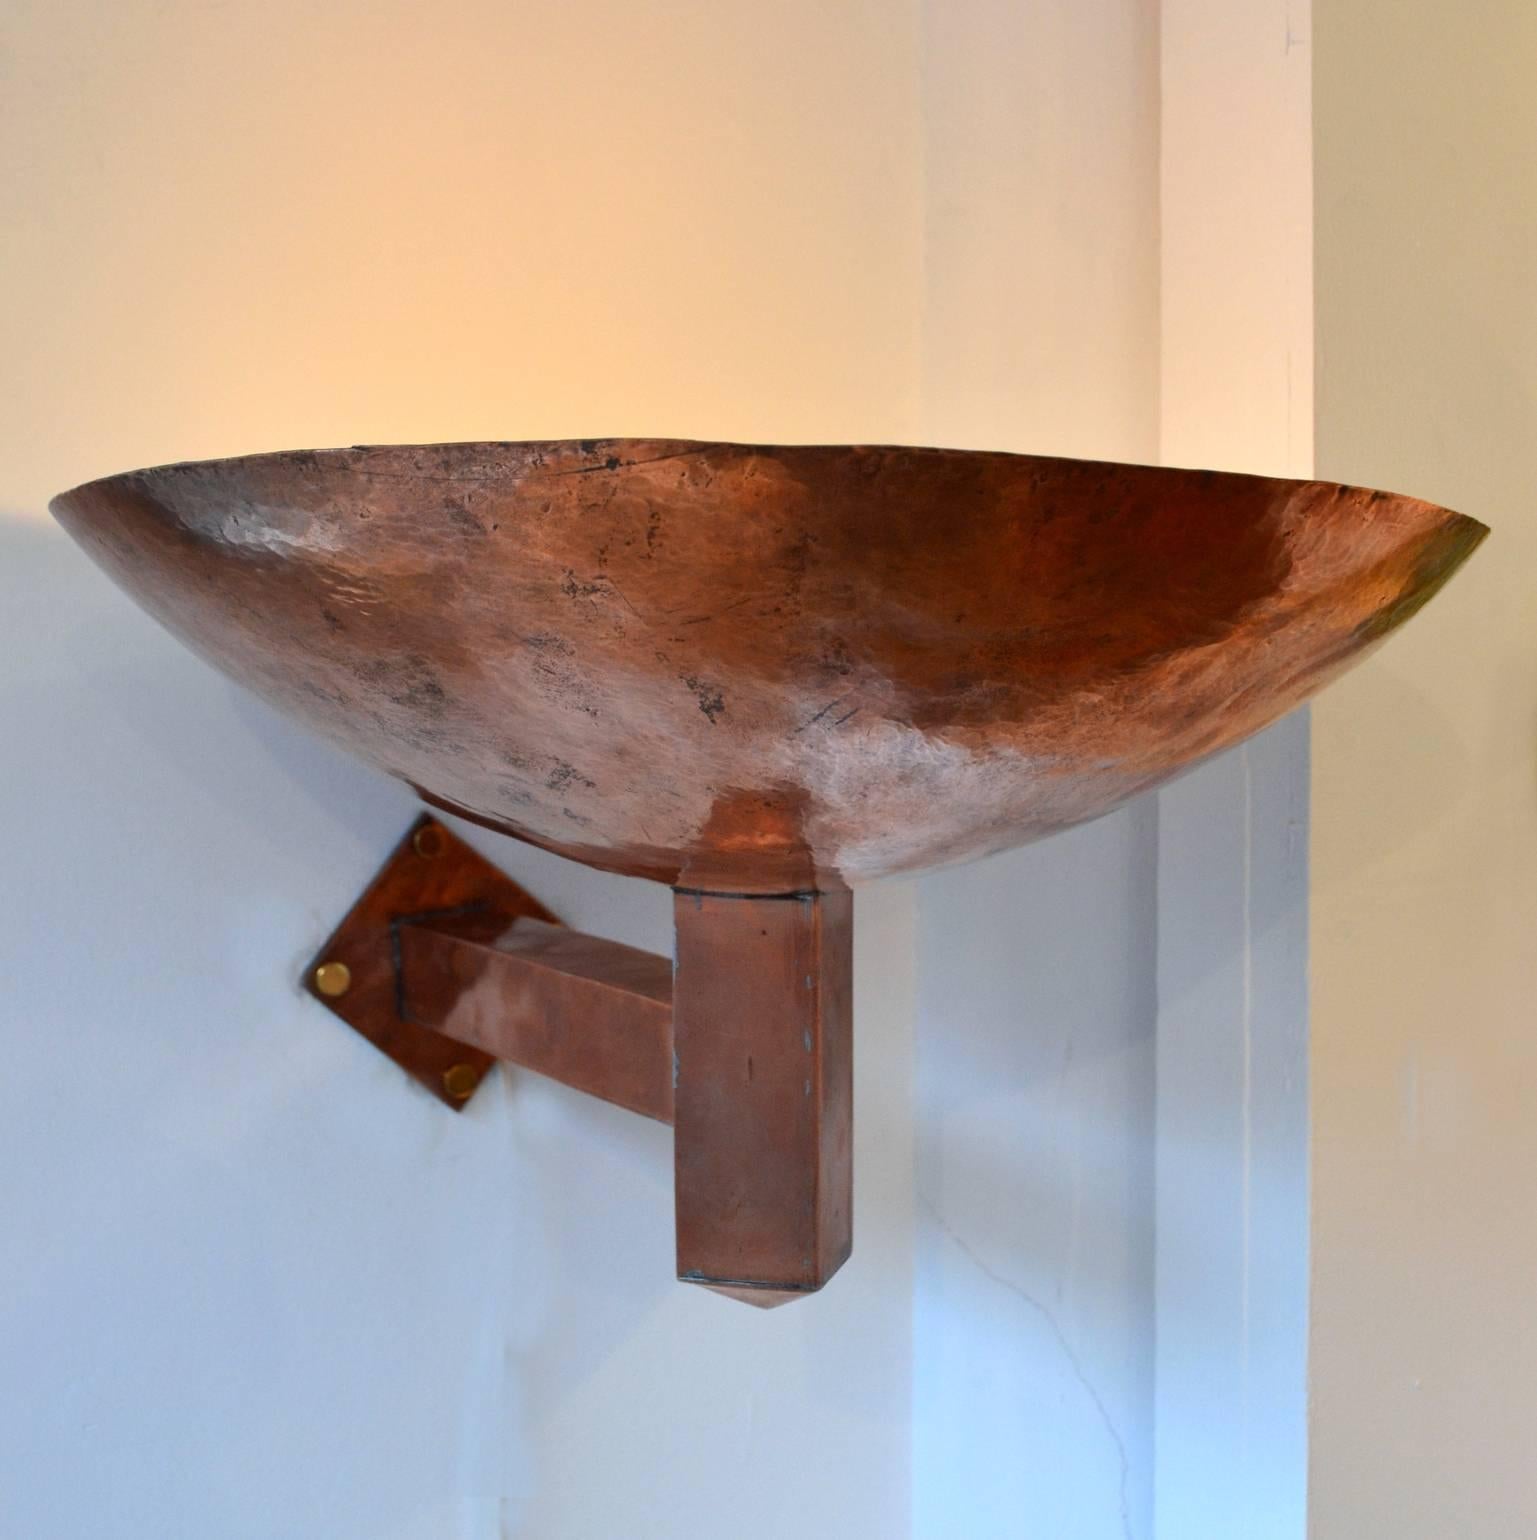 Hand beaten and formed large dish creates an uplight effect. They are in the style of School of Amsterdam and came from a public building in the Netherlands.